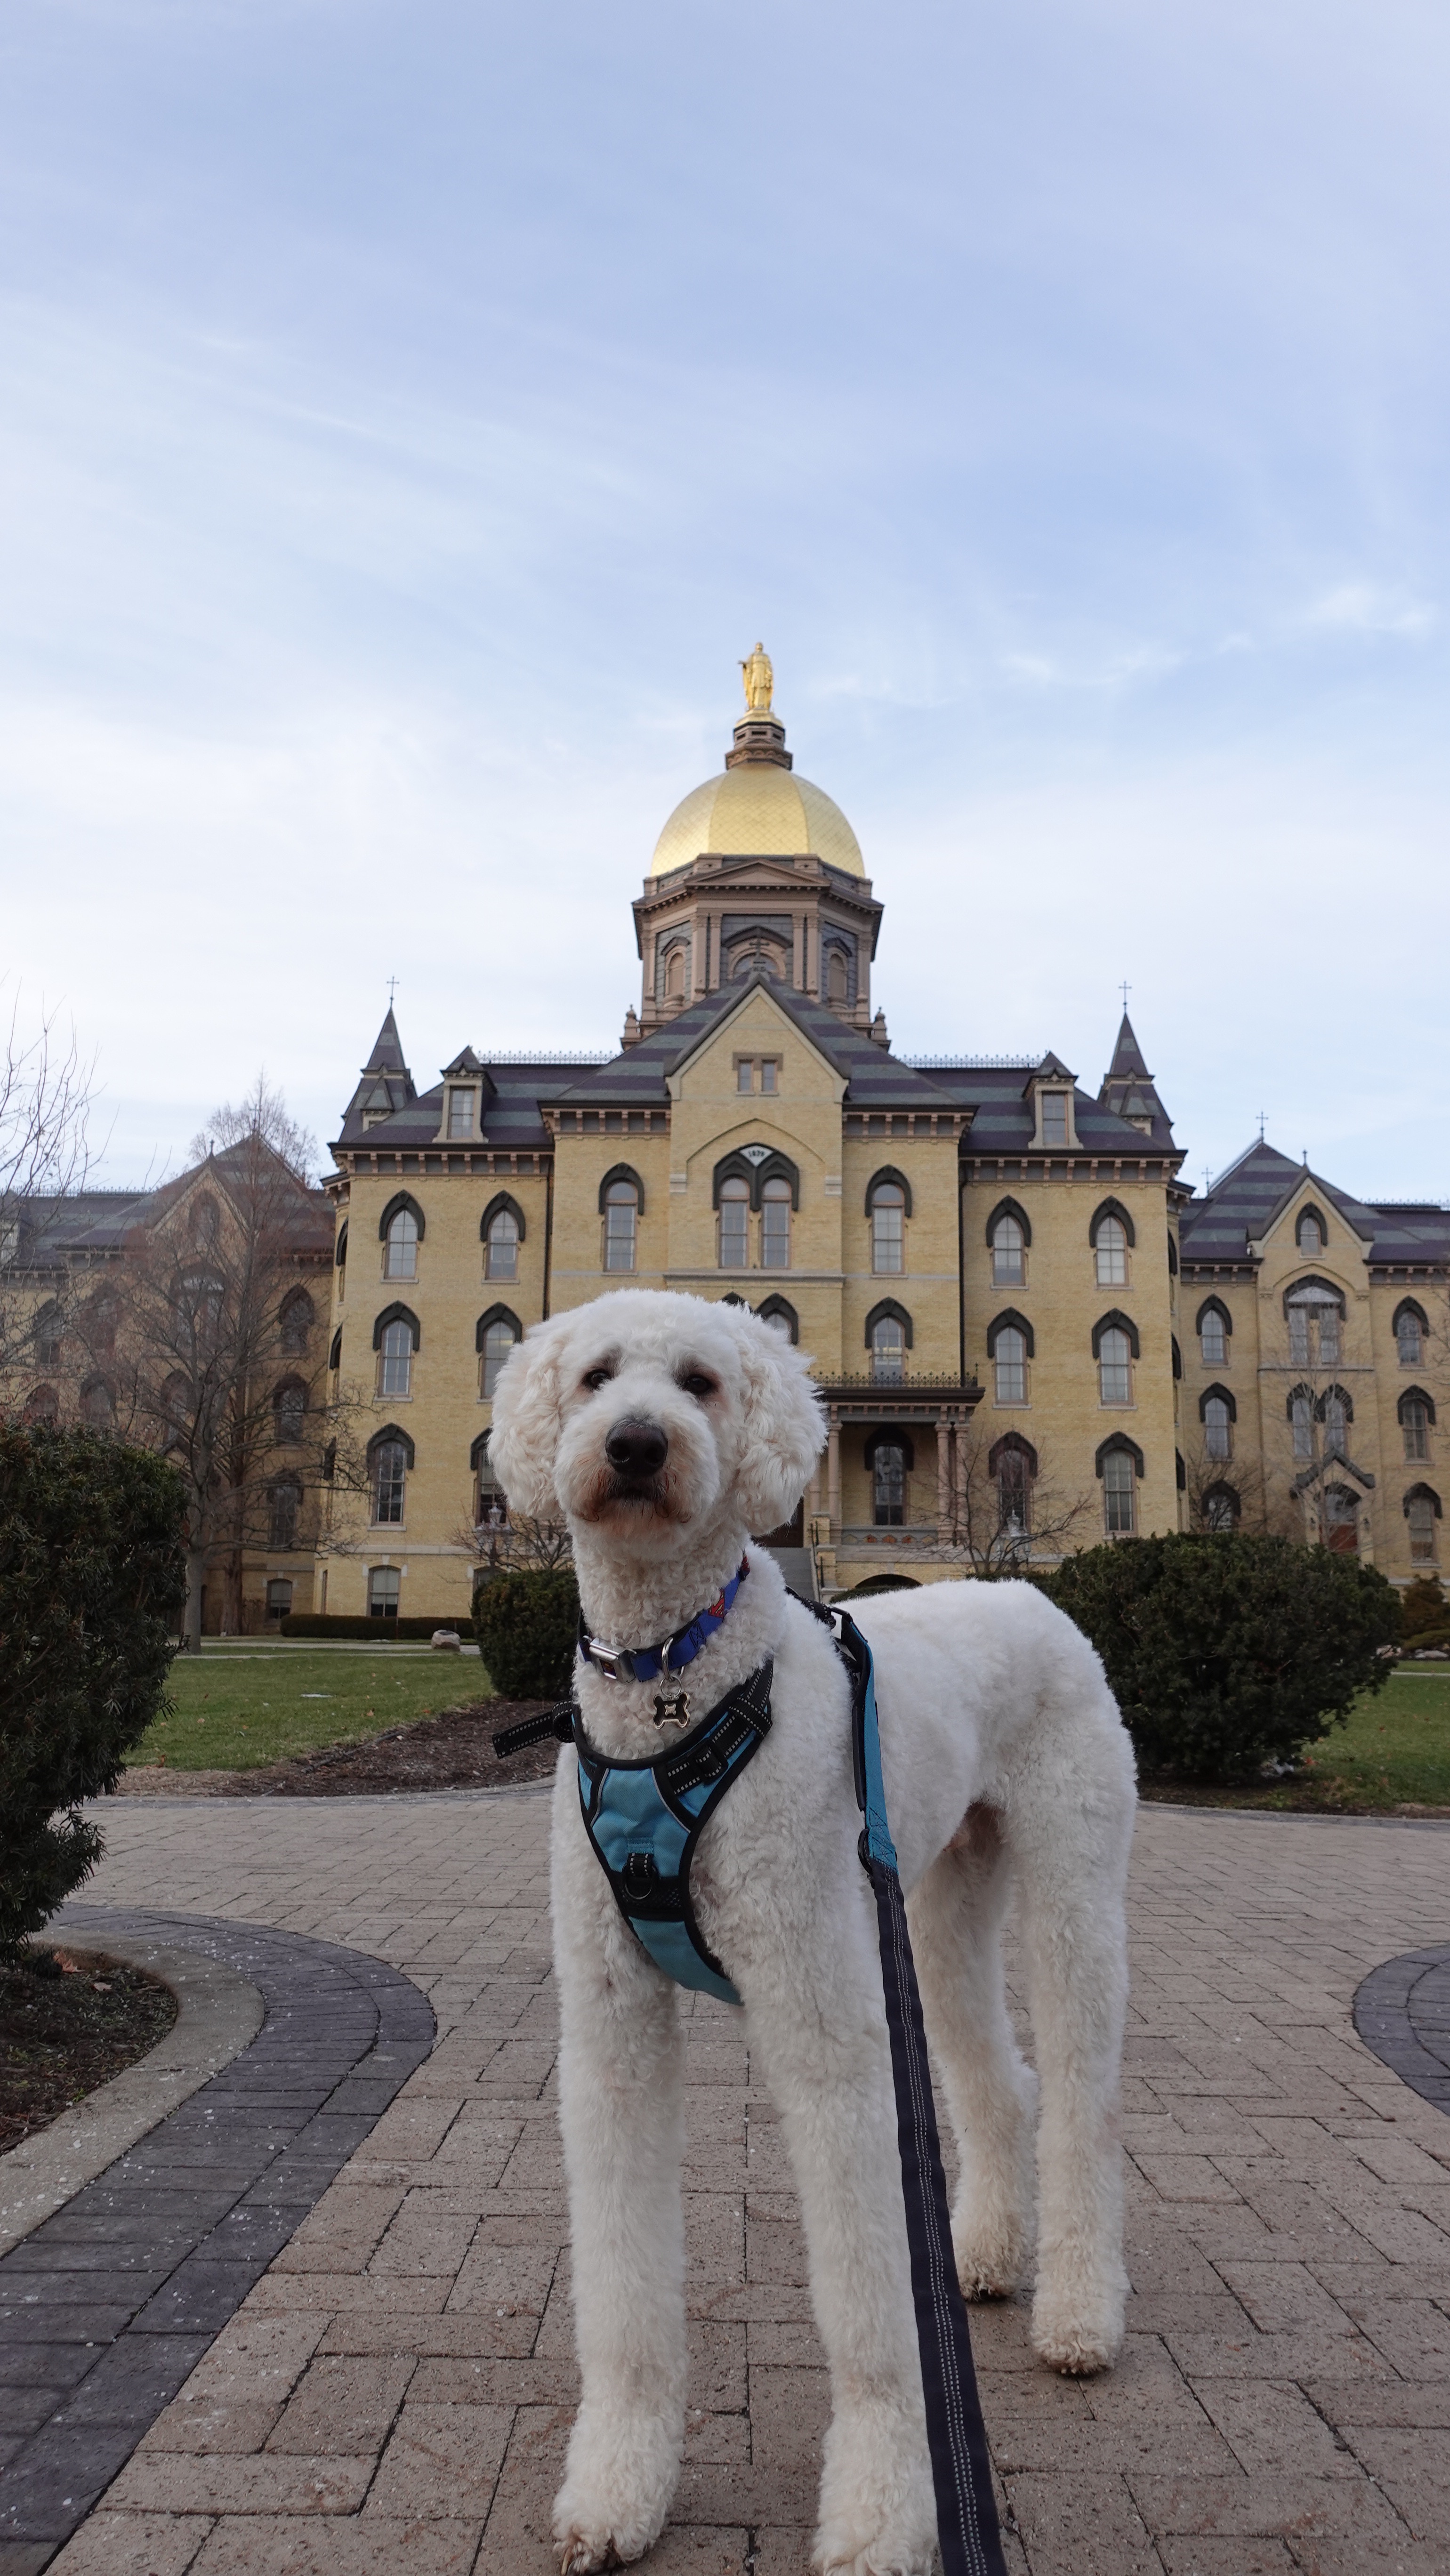 White dog in a blue harness standing in front of the University of Notre Dame's Golden Dome.